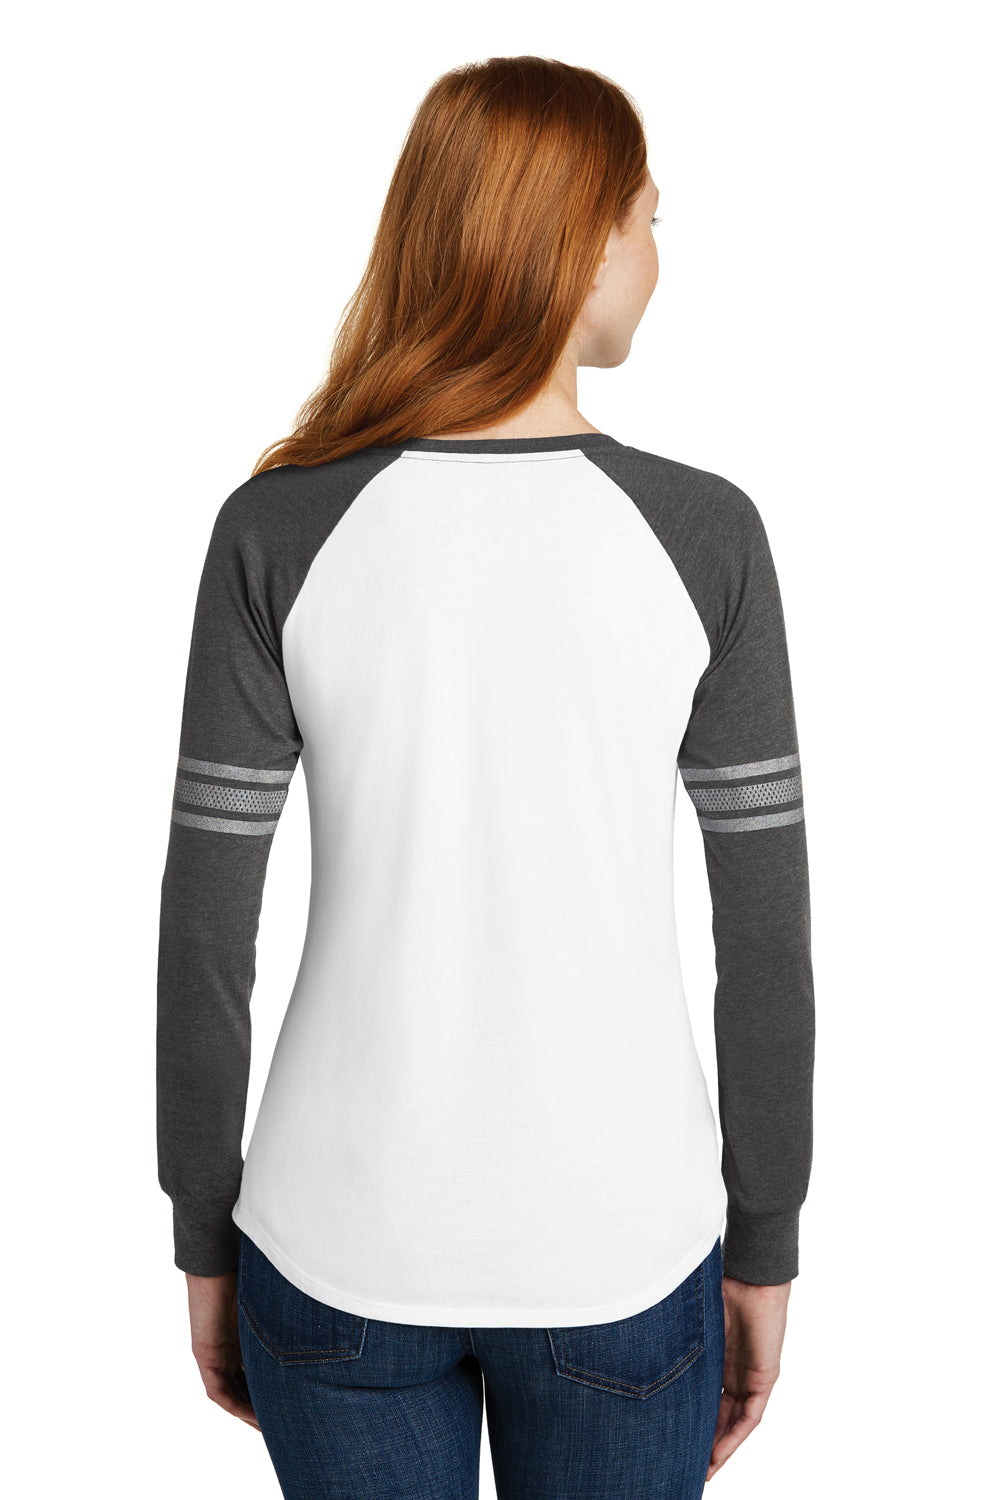 District DM477 Womens Game Long Sleeve V-Neck T-Shirt White/Heather Charcoal Grey/Silver Grey Back